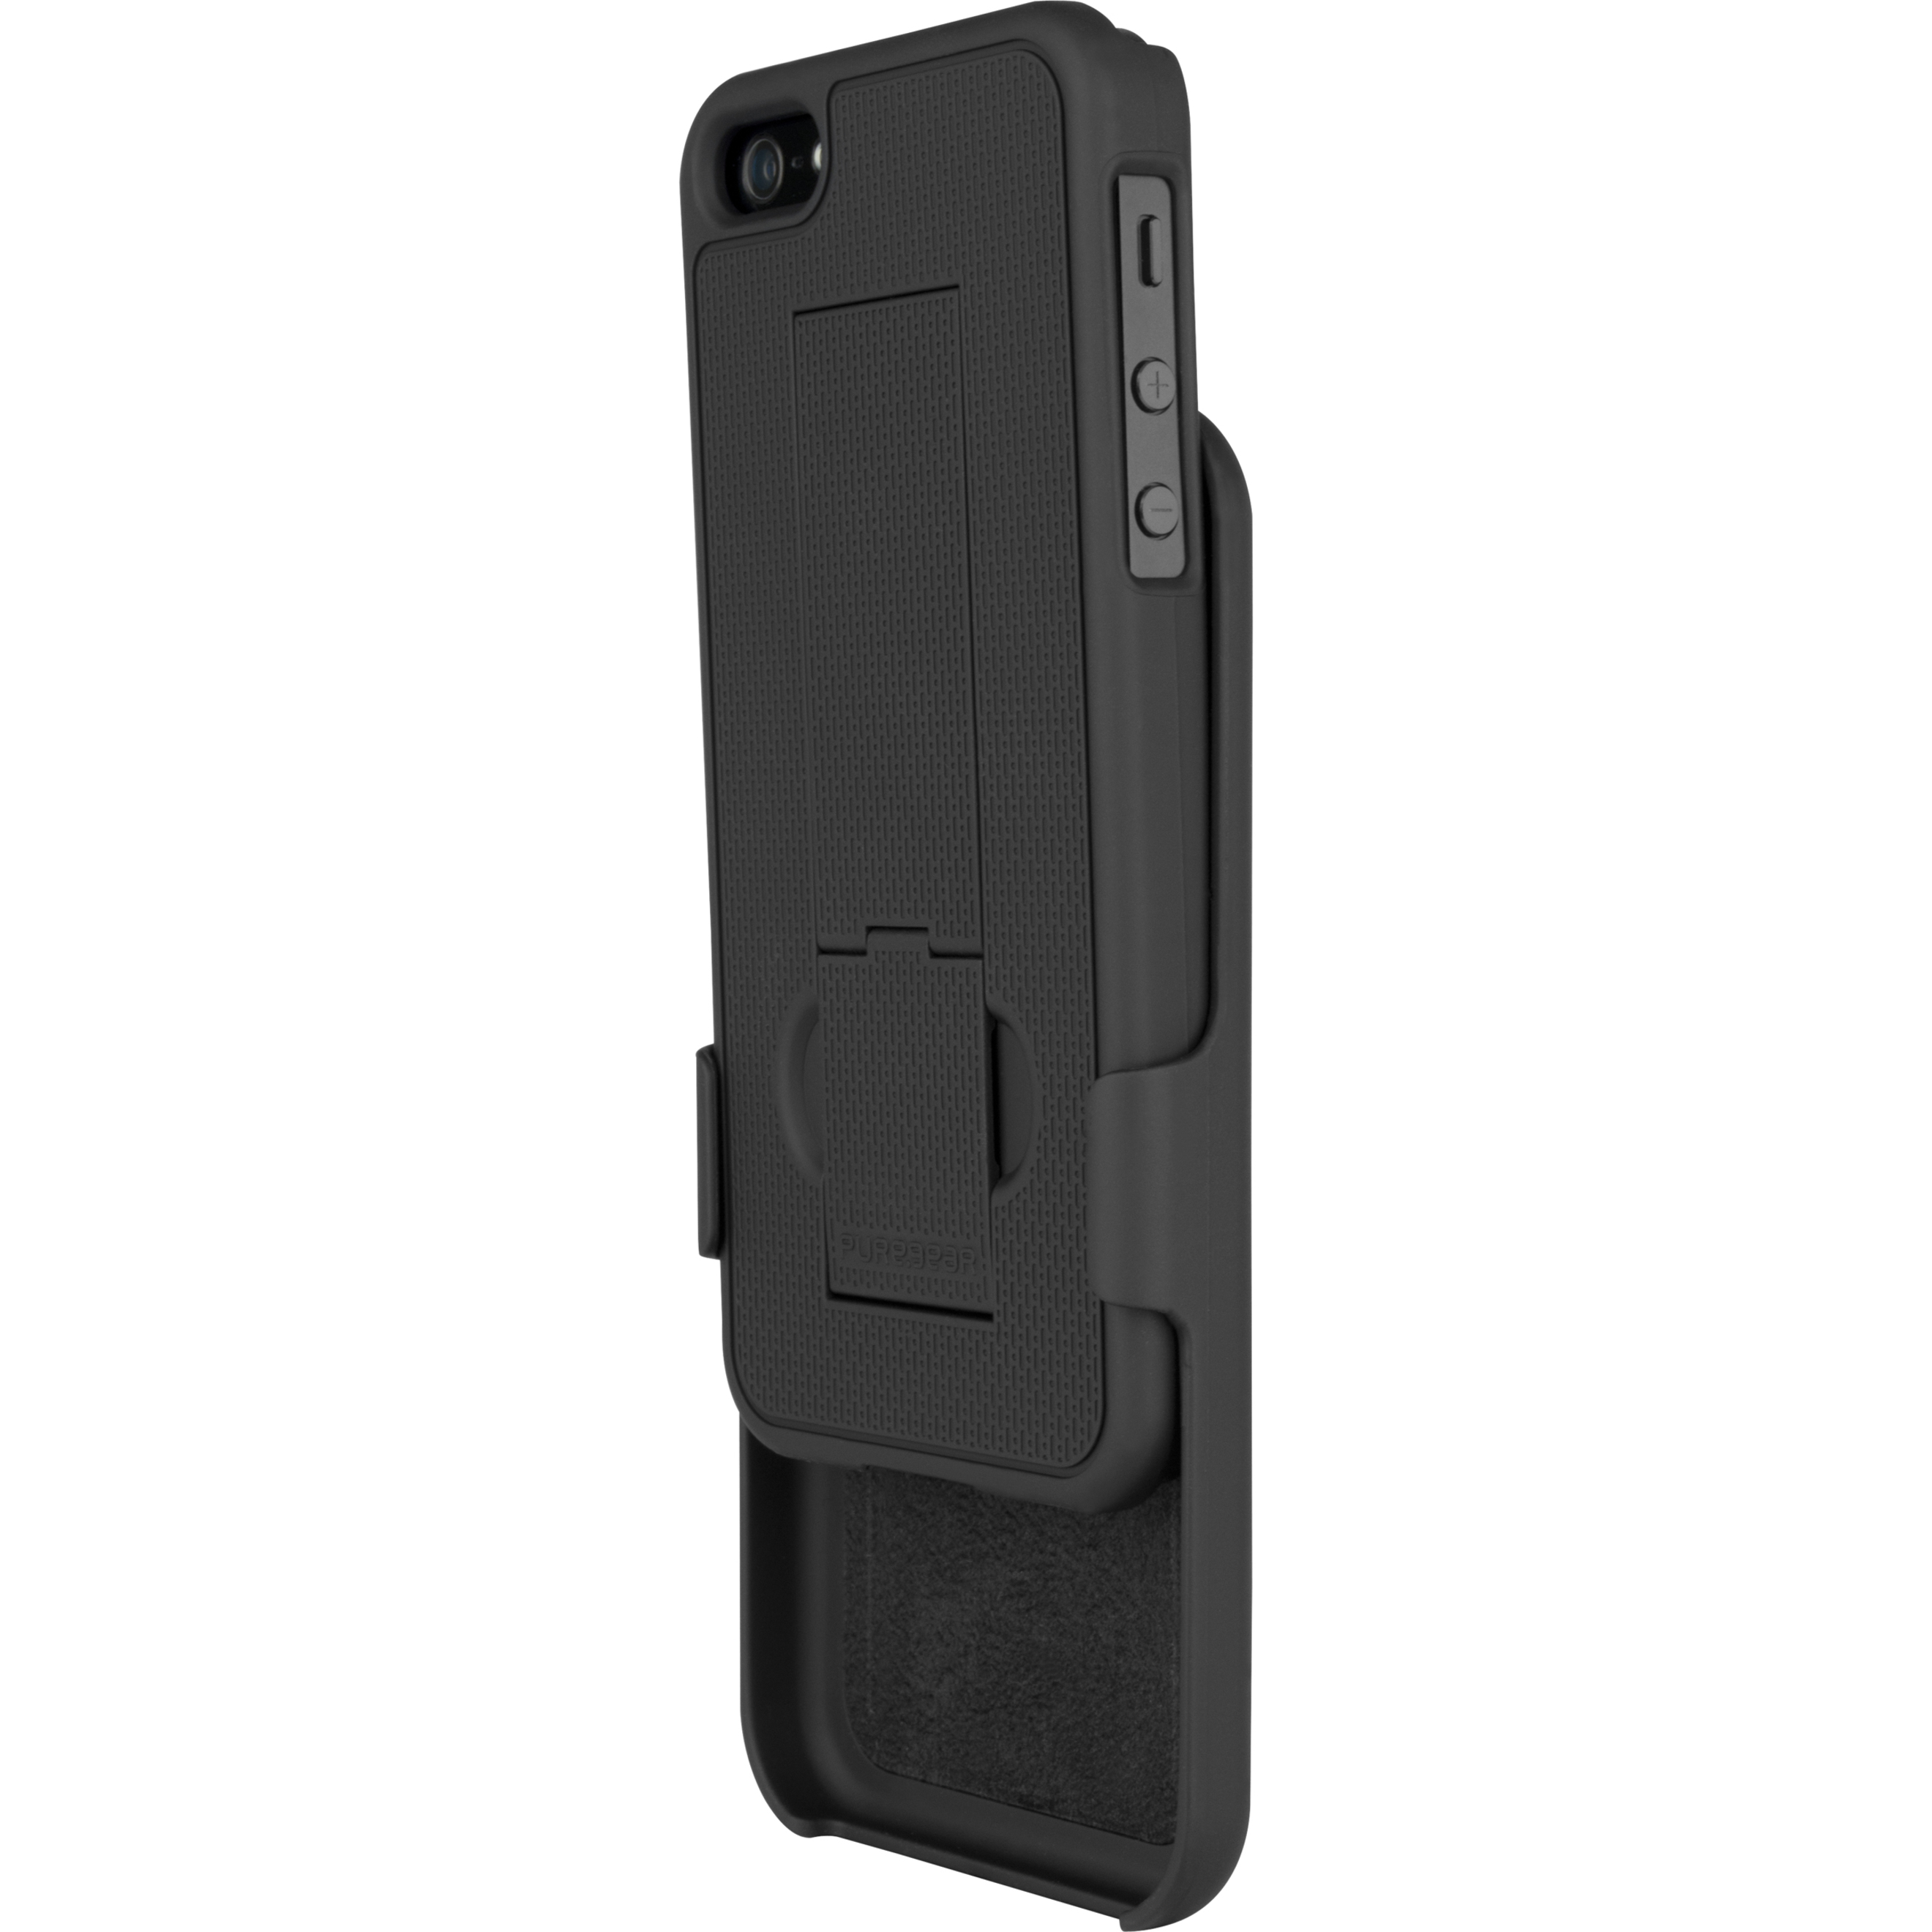 PureGear Carrying Case (Holster) Apple iPhone Smartphone, Black - image 4 of 4